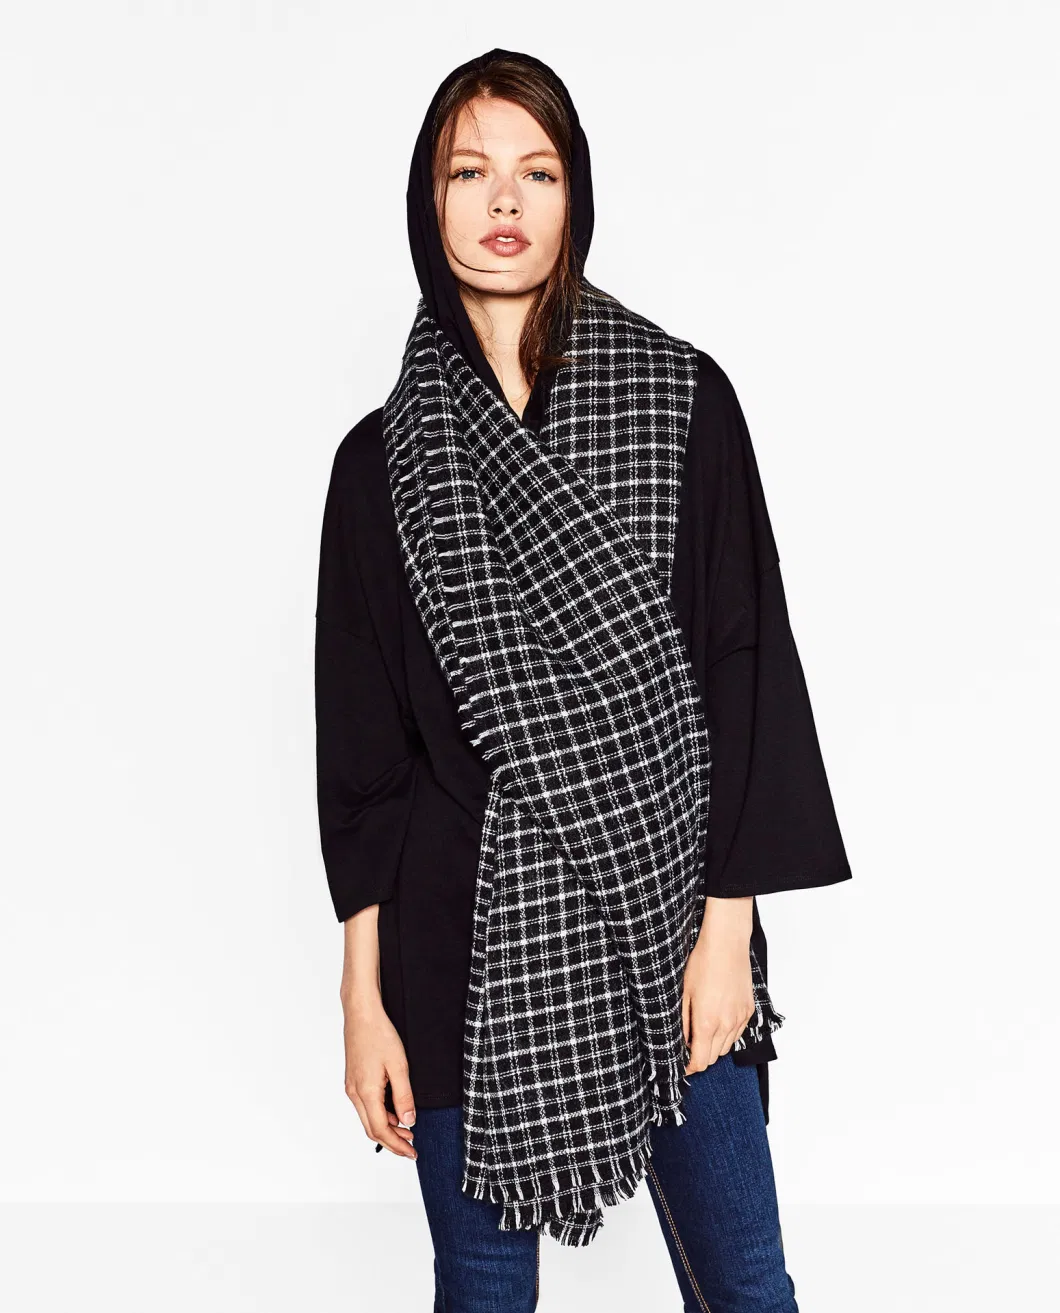 Winter Square Plaid Cashmere Blanket Scarf for Women Warm Checkered Wraps Wool Pashmina Scarf